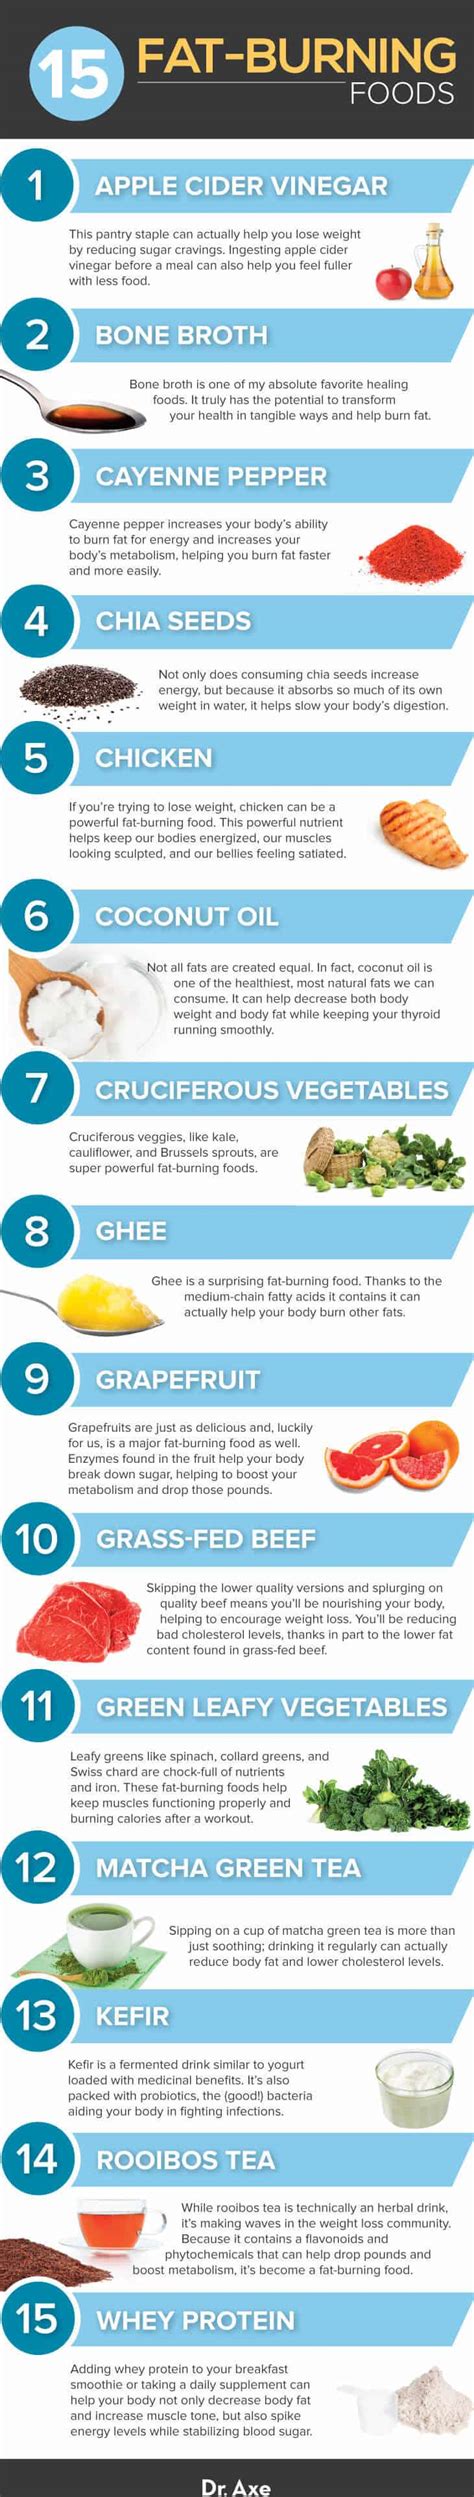 20 Plus Fat Burning Foods To Add To Your Diet Today Dr Axe